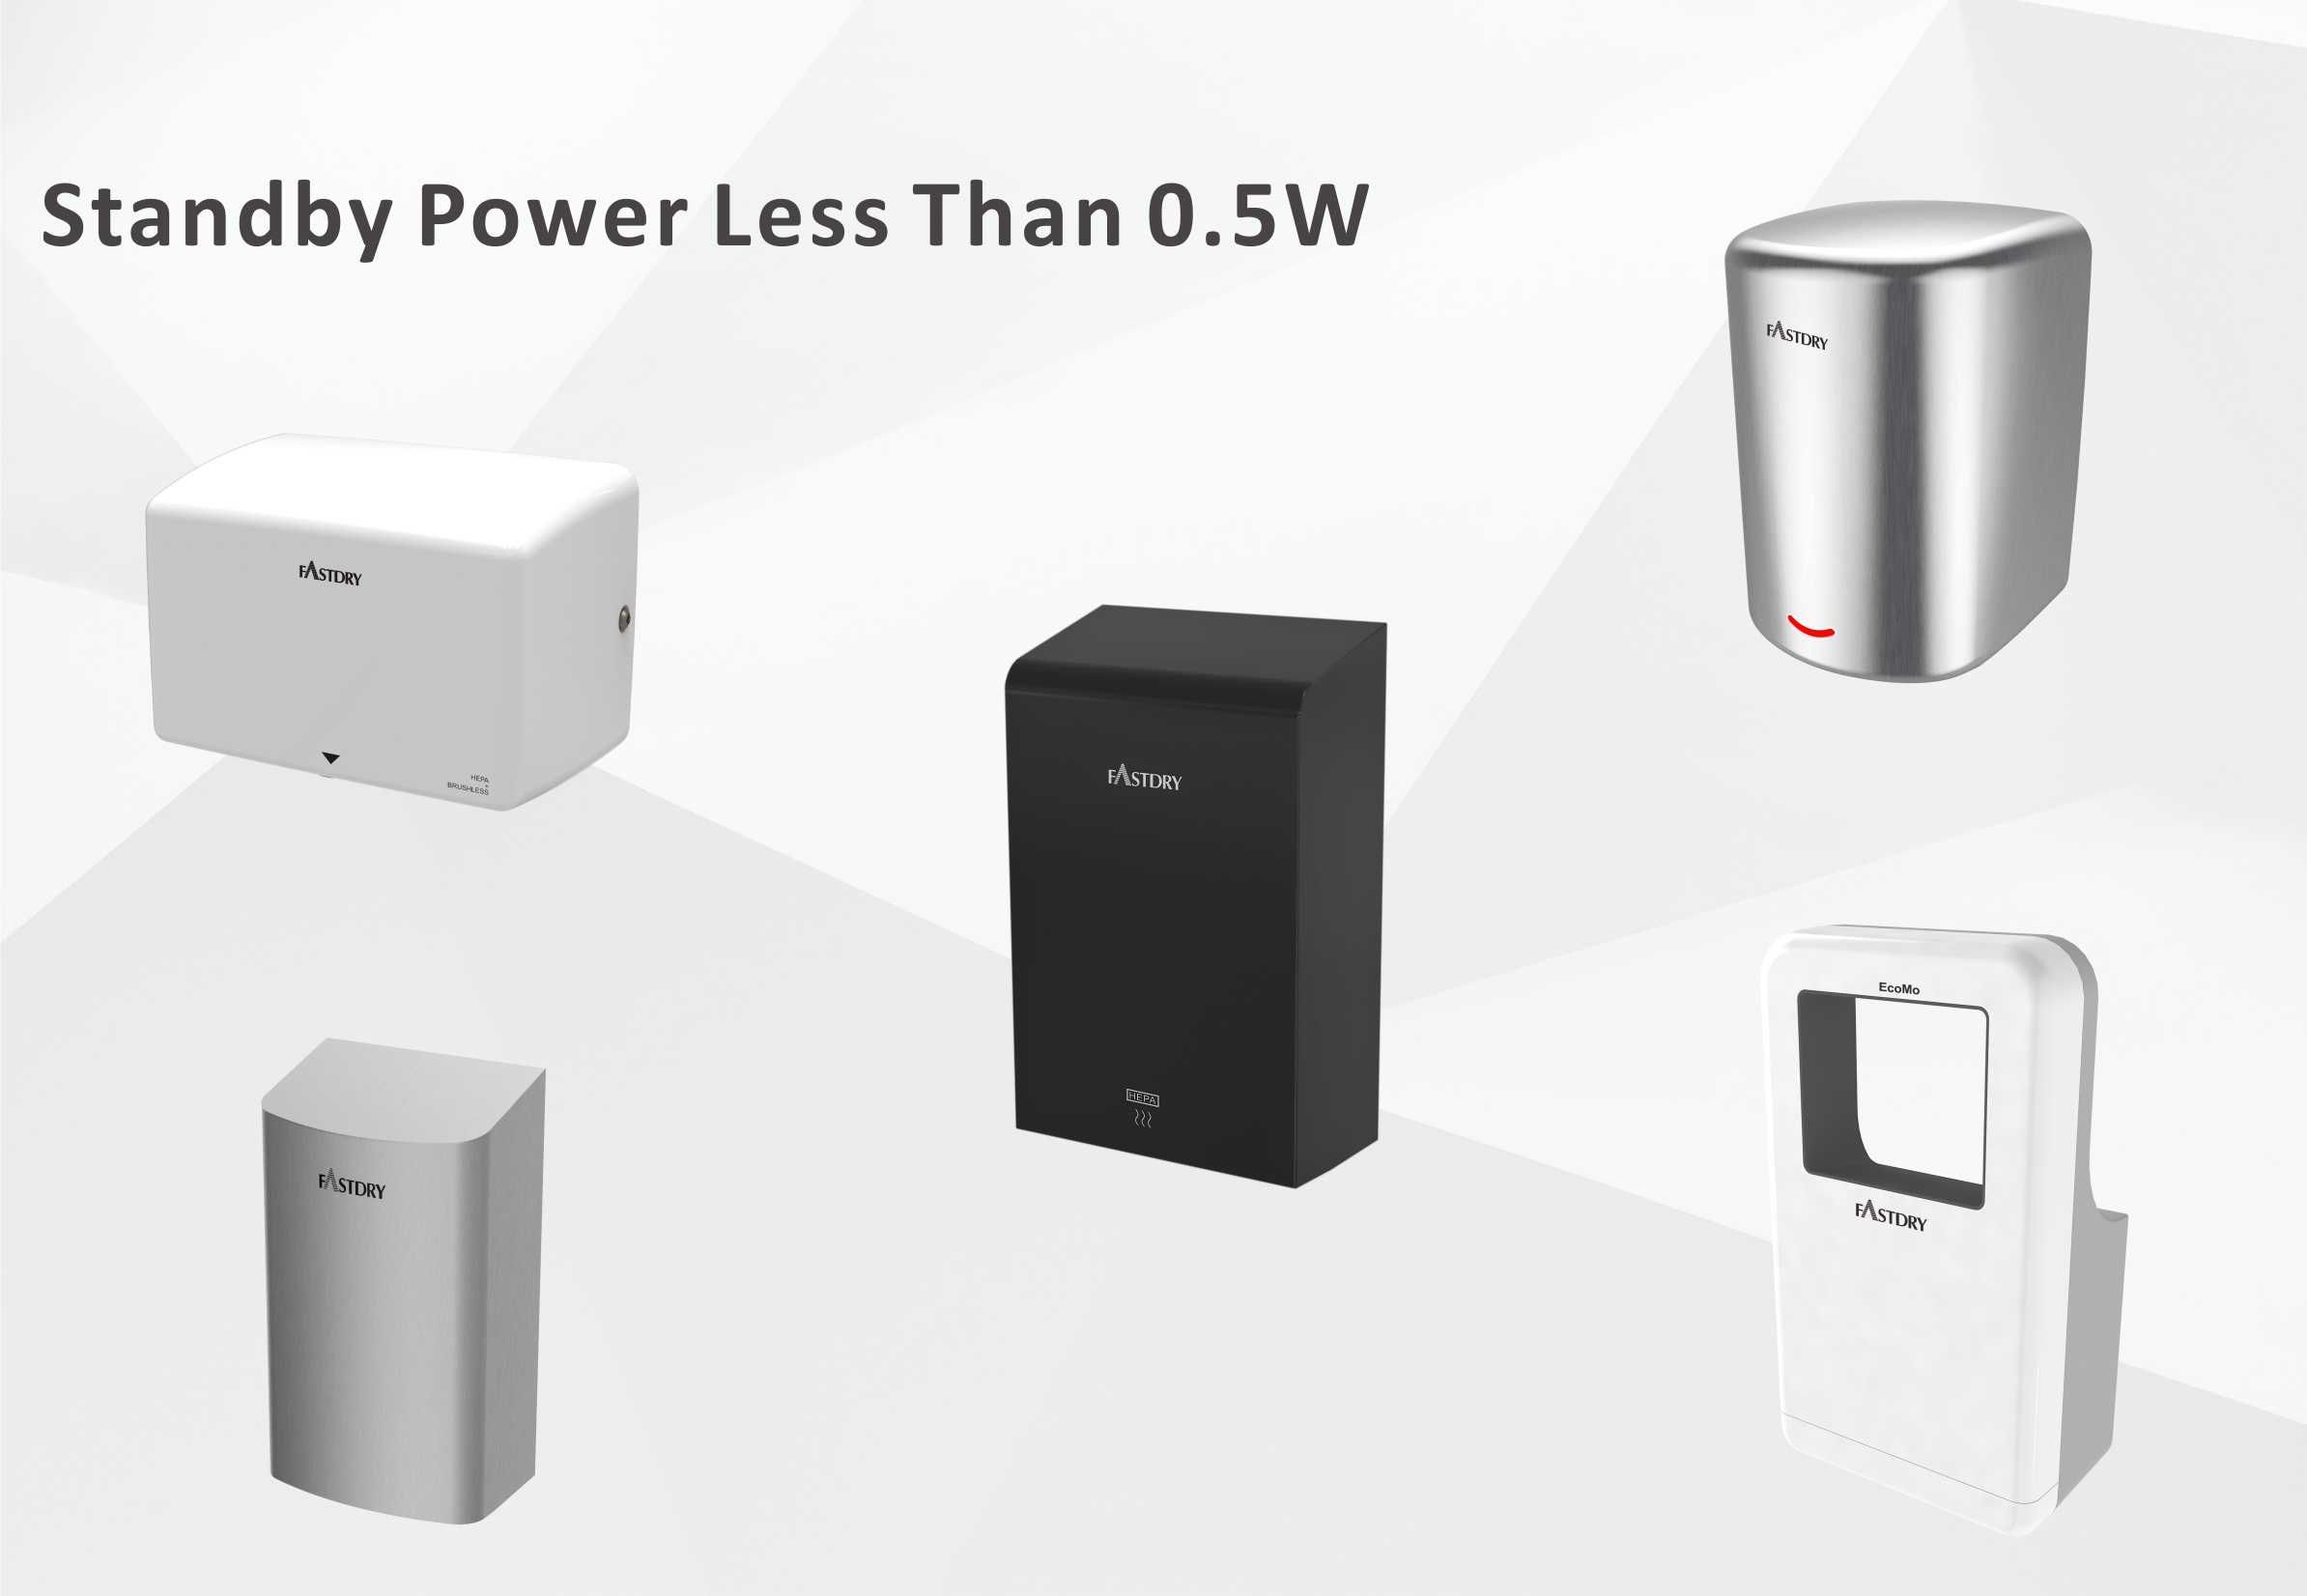 Hand Dryer with Standby Power Less Than 0.5W